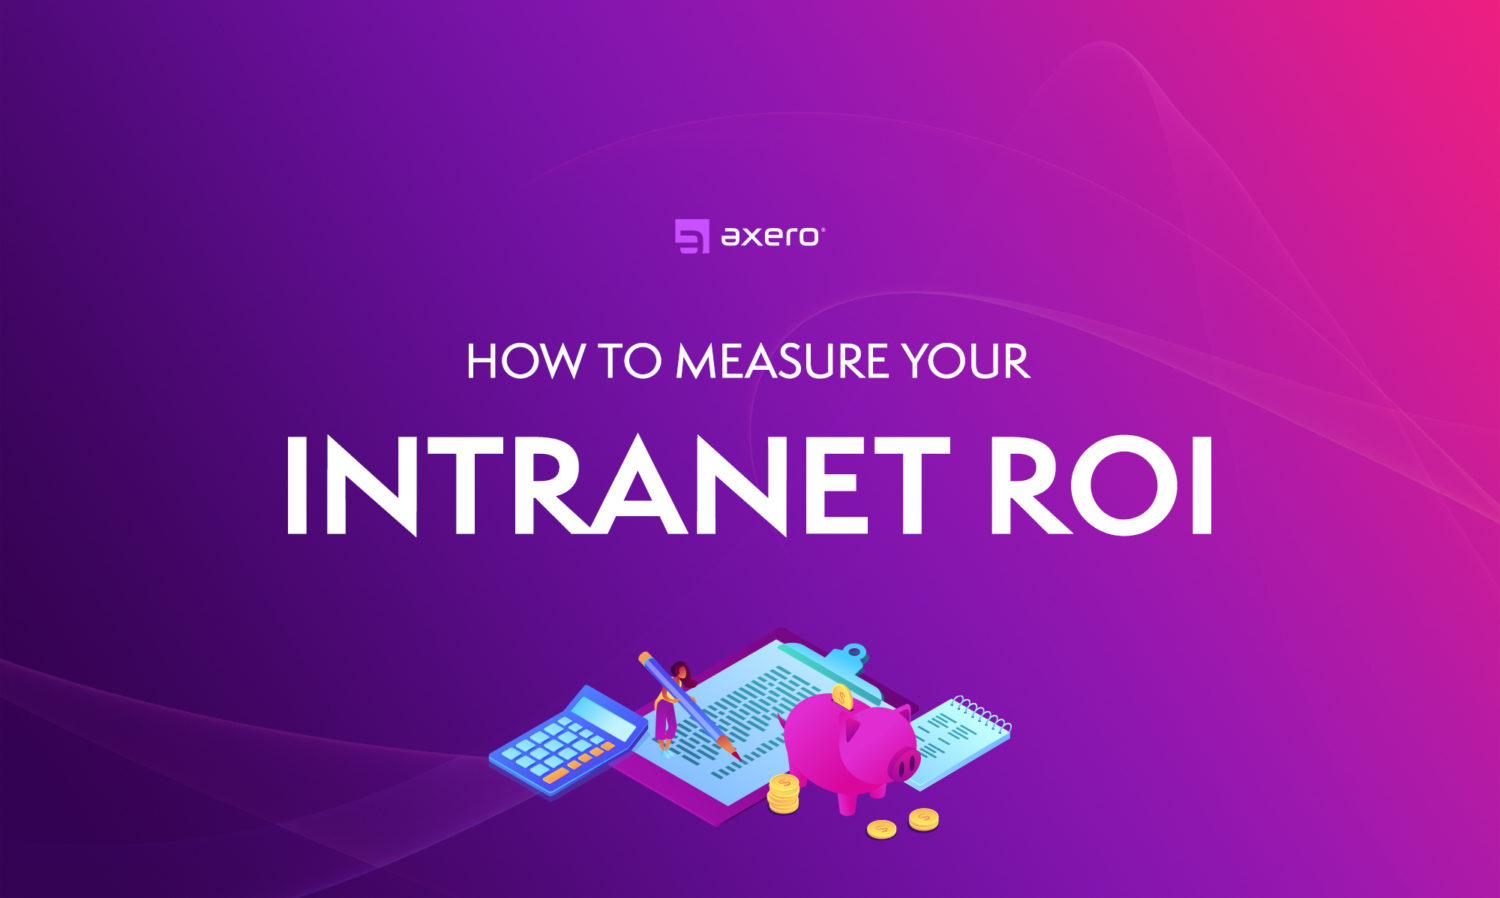 Intranet ROI: 10 Tips to Consider When Attempting to Measure it